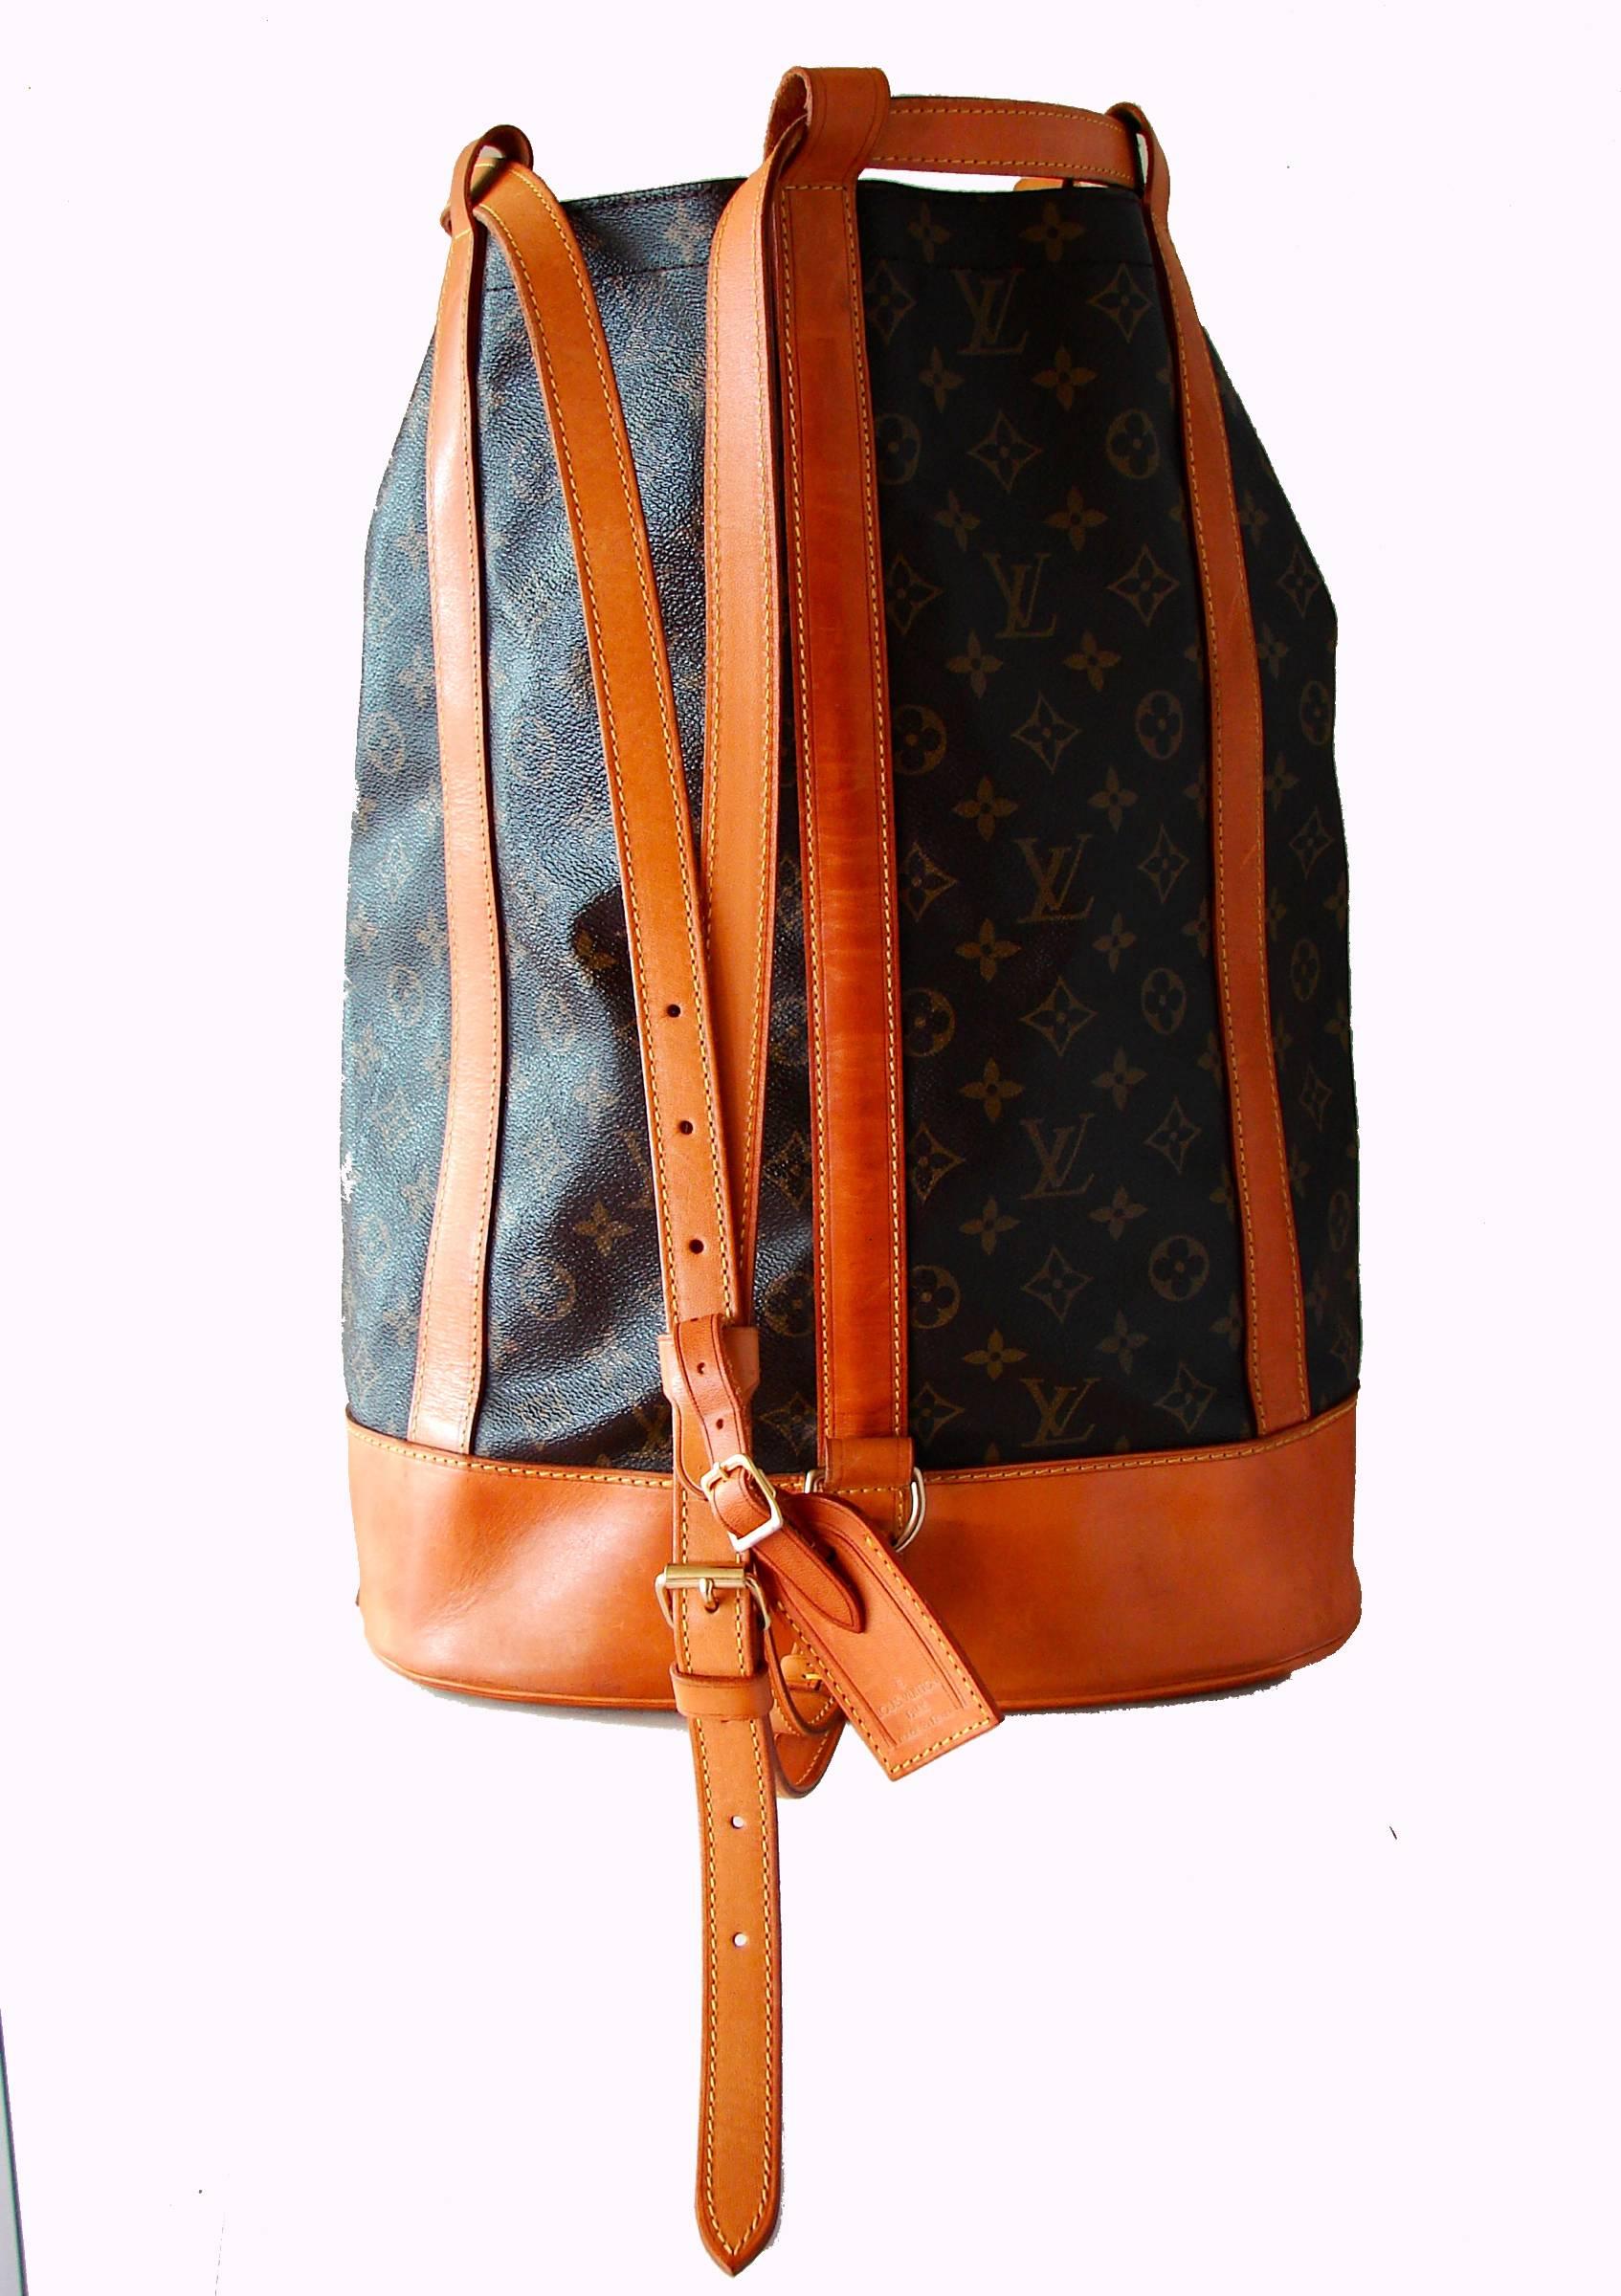 This incredible travel bag was made by Louis Vuitton in 1993.  Made from their signature monogram canvas, it's trimmed in vachetta leather and features a brown canvas interior.  Comes with its original, removable monogram zip pouch and vachetta